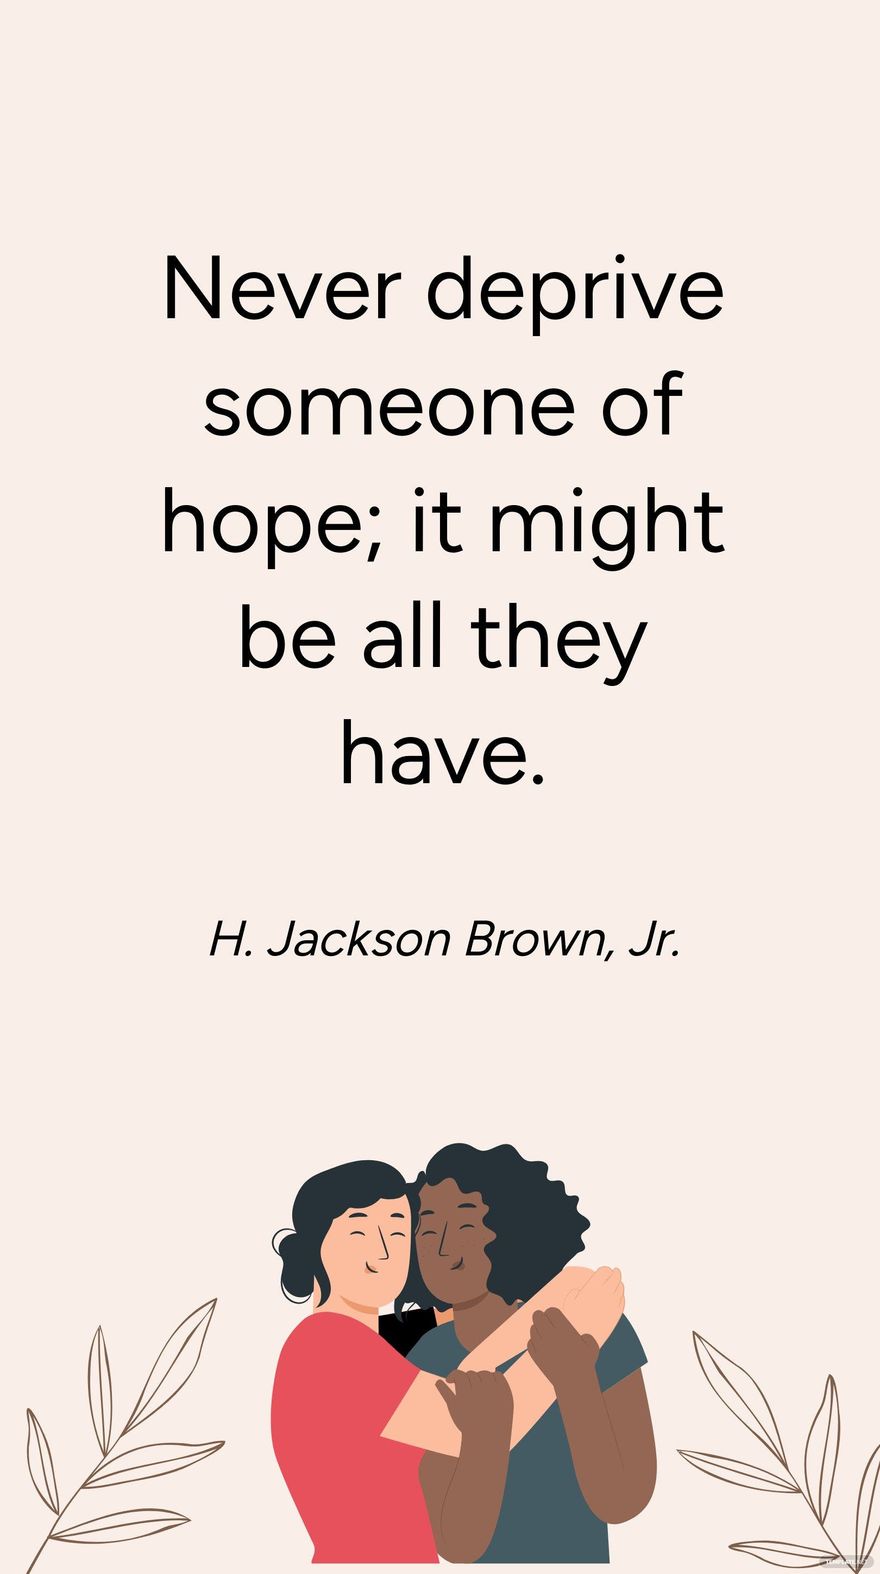 Free H. Jackson Brown, Jr. - Never deprive someone of hope; it might be all they have. in JPG